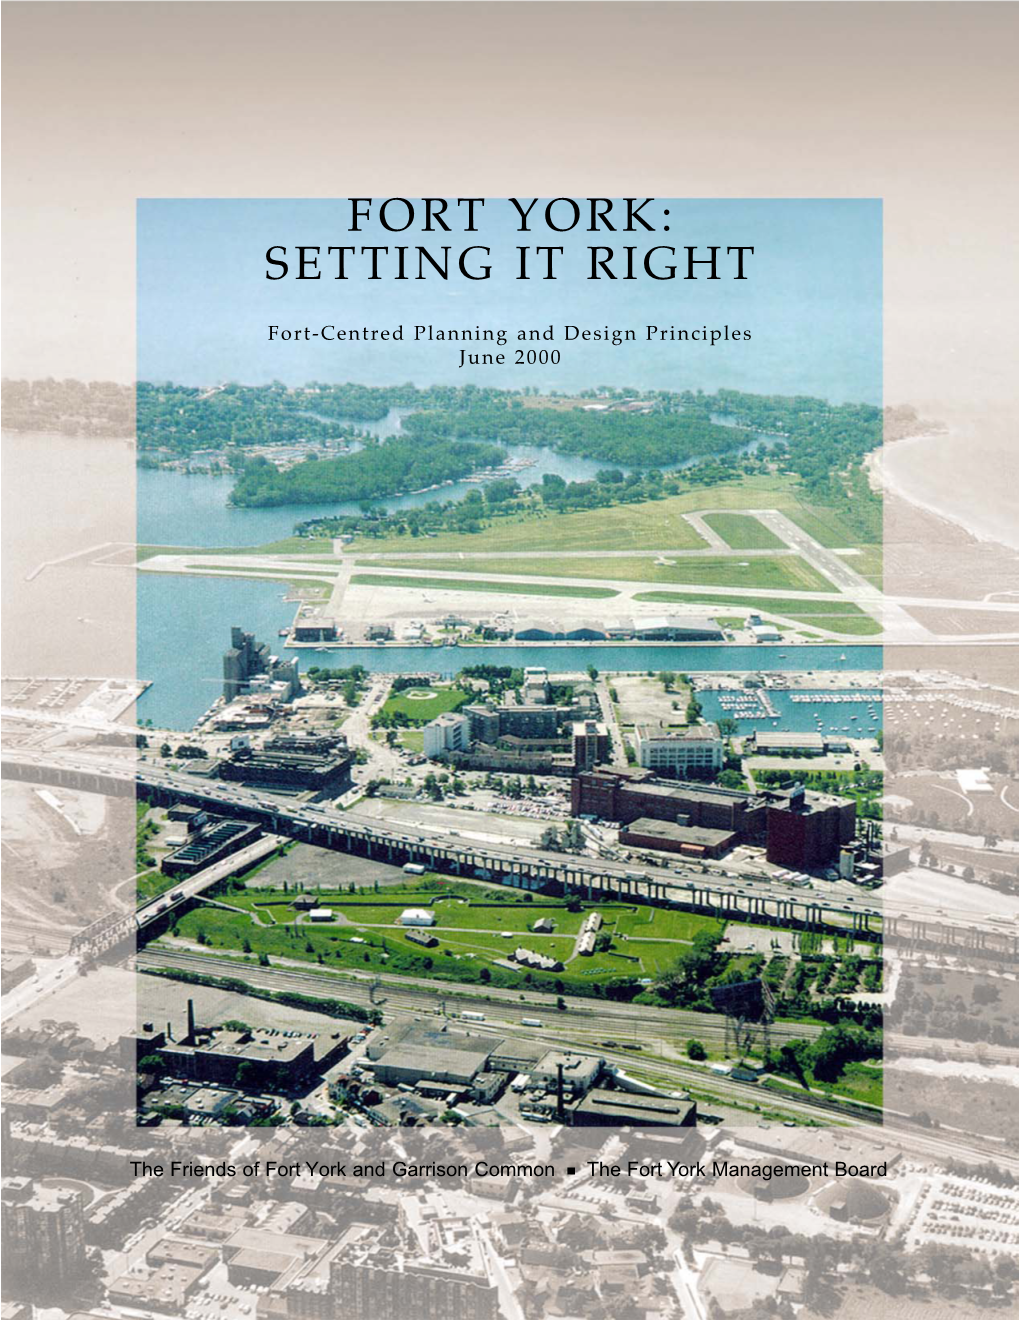 Fort York: Setting It Right, 2000